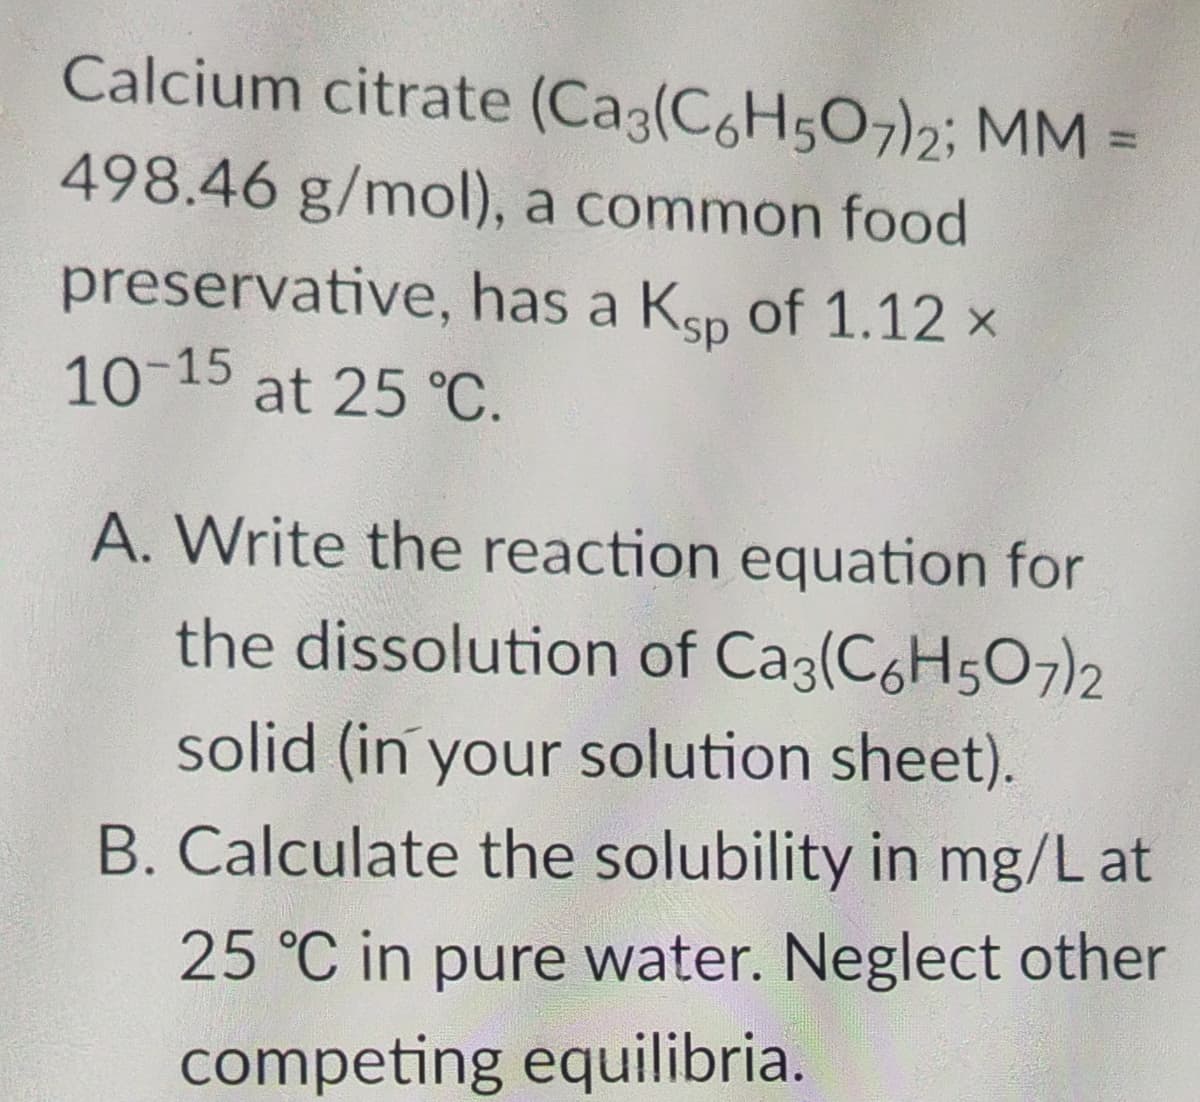 Calcium citrate (Ca3(C6H507)2; MM =
498.46 g/mol), a common food
preservative, has a Ksp of 1.12 ×
10-15 at 25 °C.
A. Write the reaction equation for
the dissolution of Ca3(C6H5O7)2
solid (in your solution sheet).
B. Calculate the solubility in mg/L at
25 °C in pure water. Neglect other
competing equilibria.